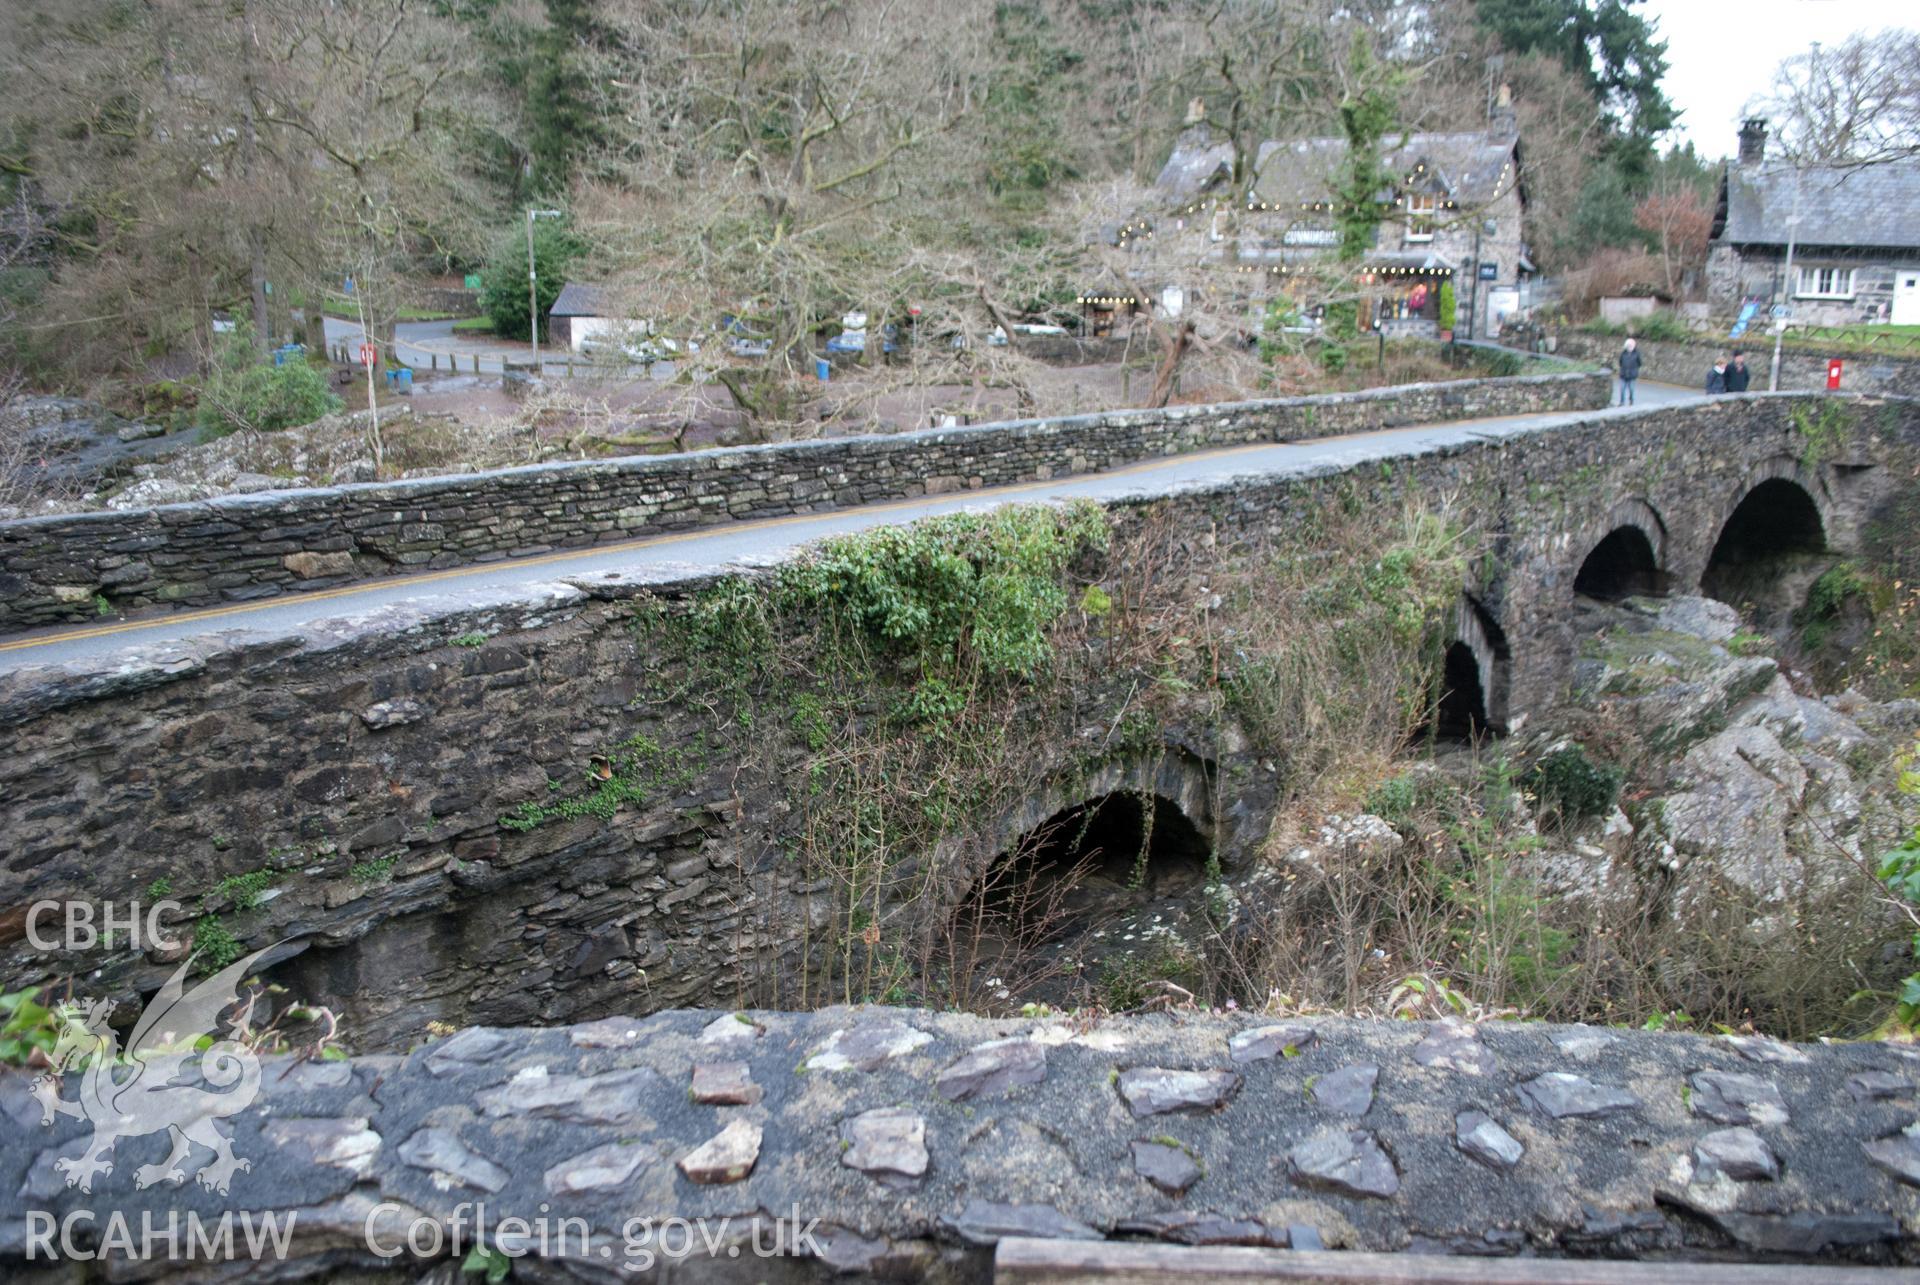 General view of Pont y Pair showing the side elevation with arches, reveals and voussoirs. Digital photograph taken for Archaeological Watching Brief at Pont y Pair, Betws y Coed, 2019. Gwynedd Archaeological Trust Project ref G2587.